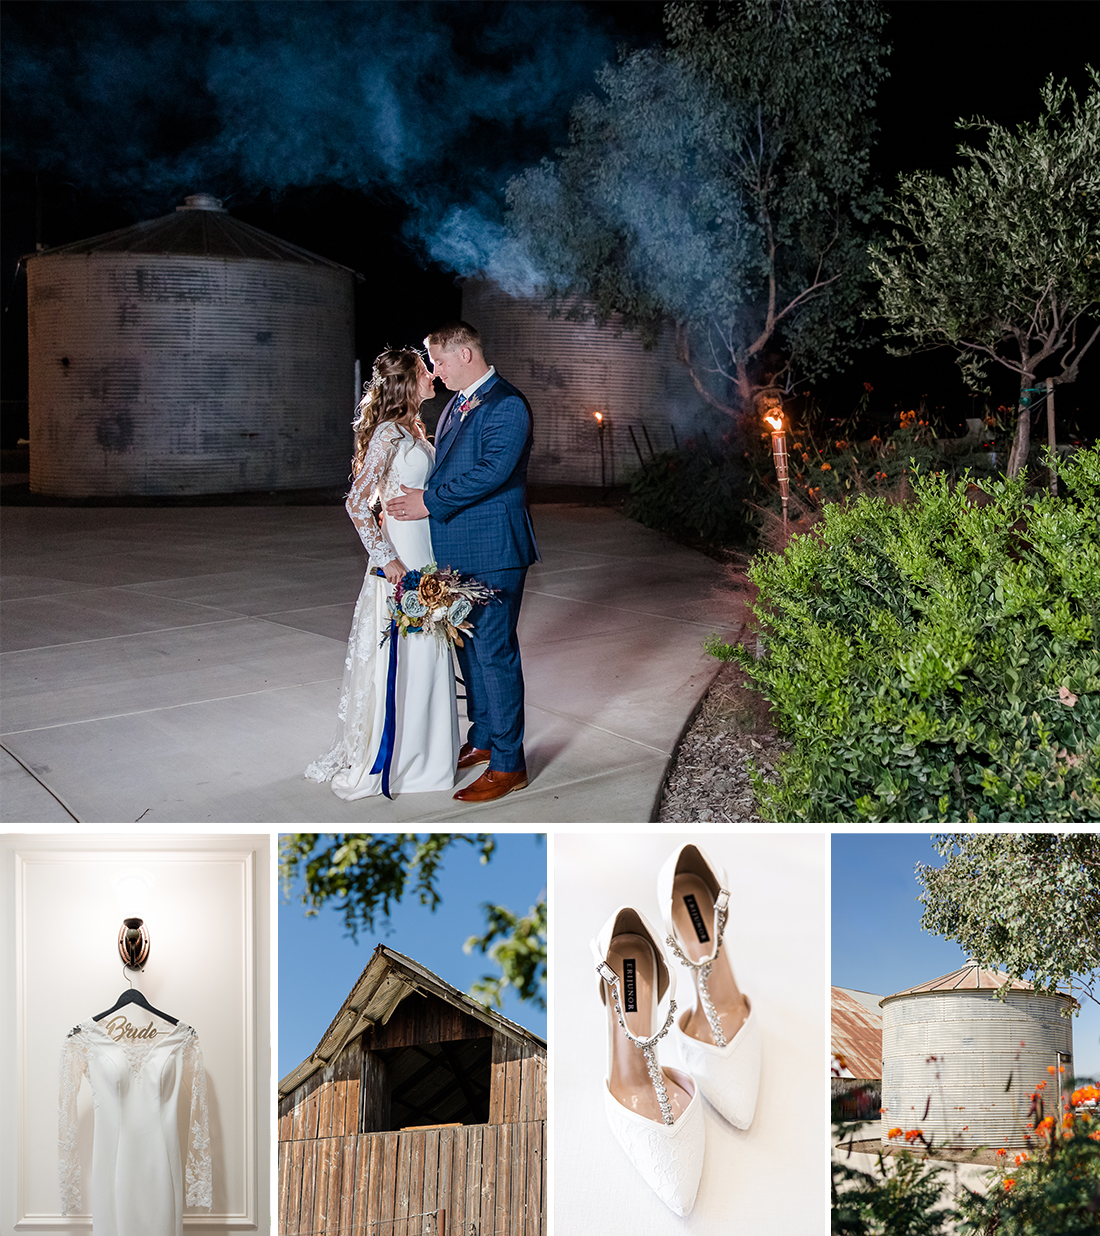 Dusty Rose | Sage Green | Fall Colors | Sparklers | Wedding in Barn | The 1903 Barn | Riverdale, California